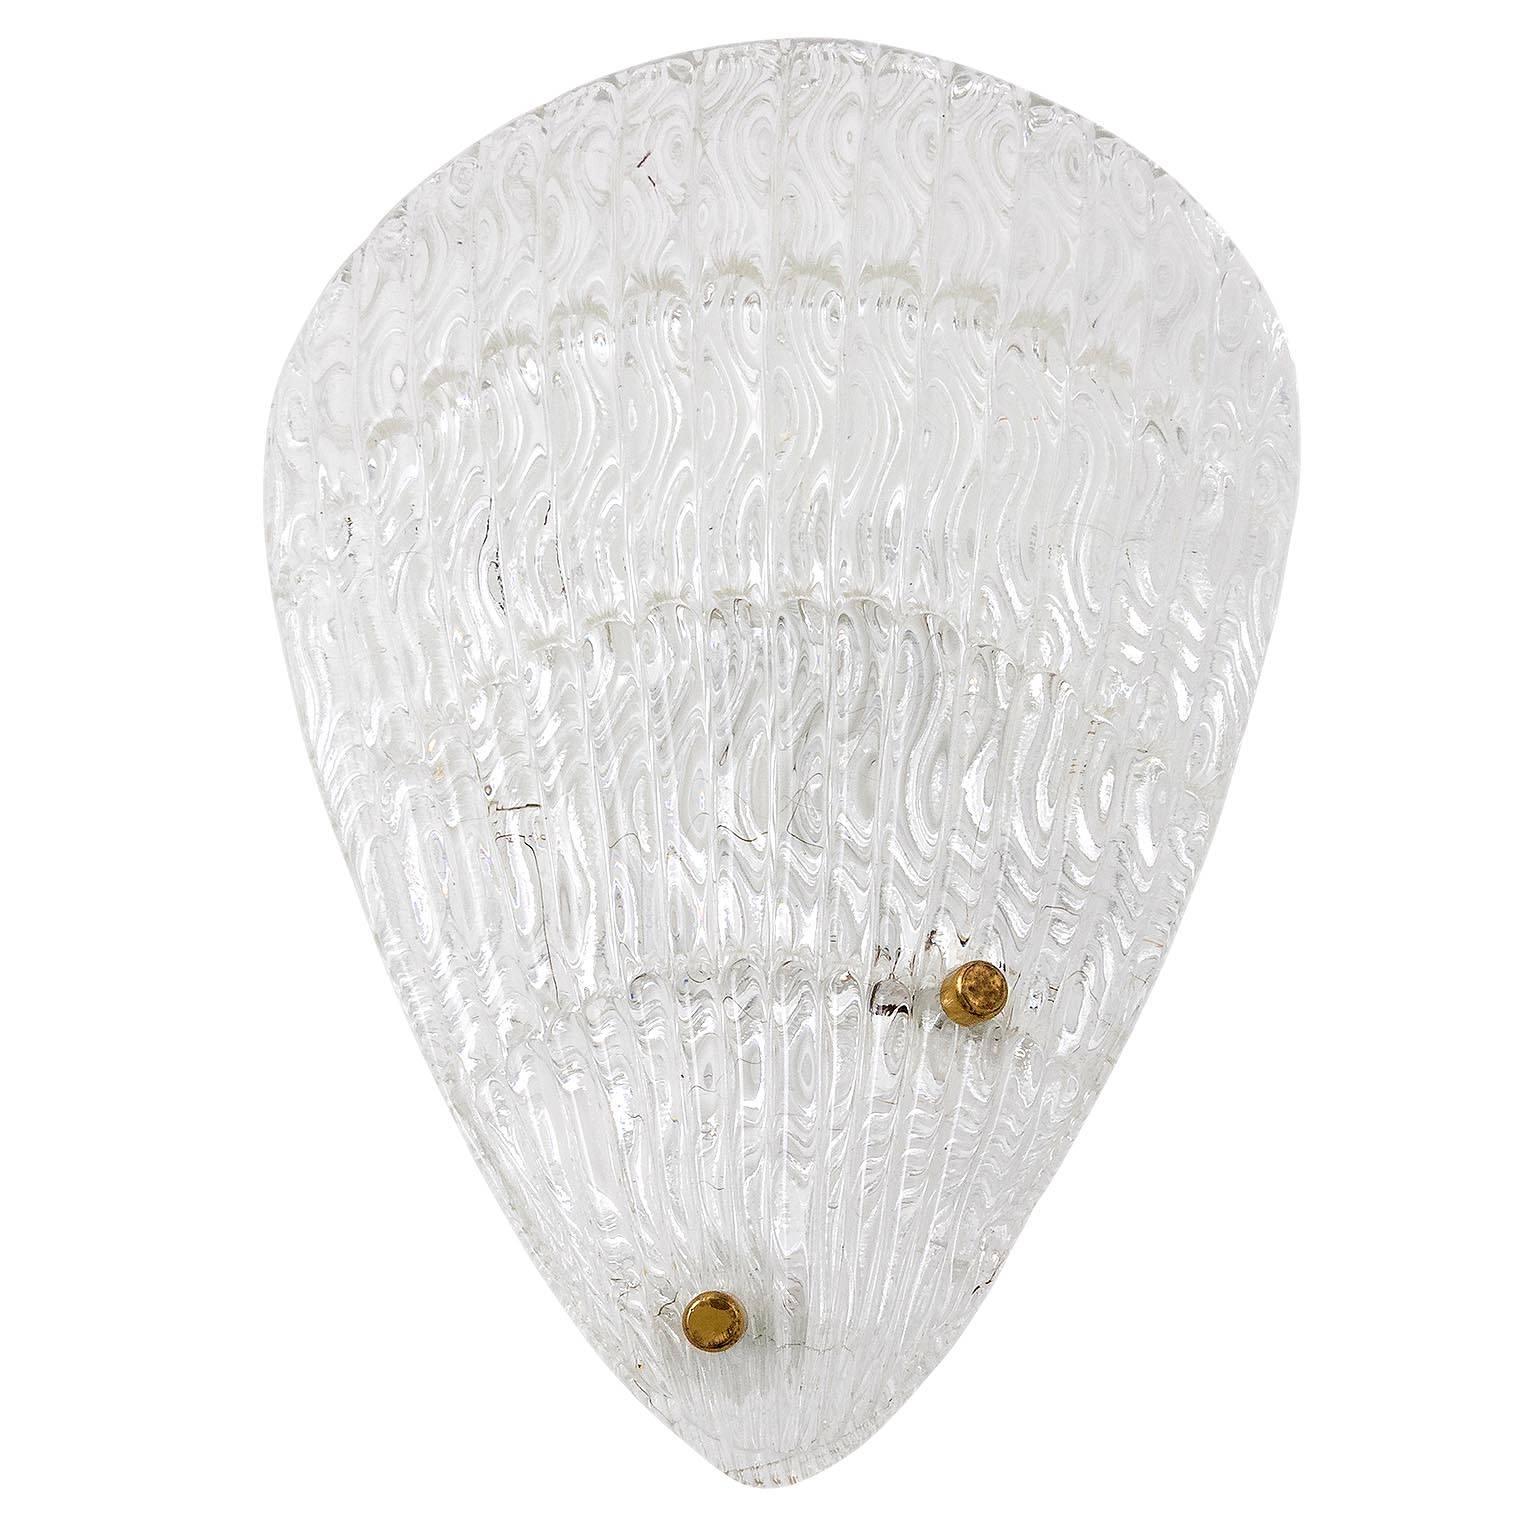 One of three large shell shaped glass sconces by Rupert Nikoll, Austria, manufactured in Mid-Century, circa 1950 (late 1950s or early 1960s).
An organic shaped glass piece is mounted with brass bolts on a white painted metal backplate.
The textured